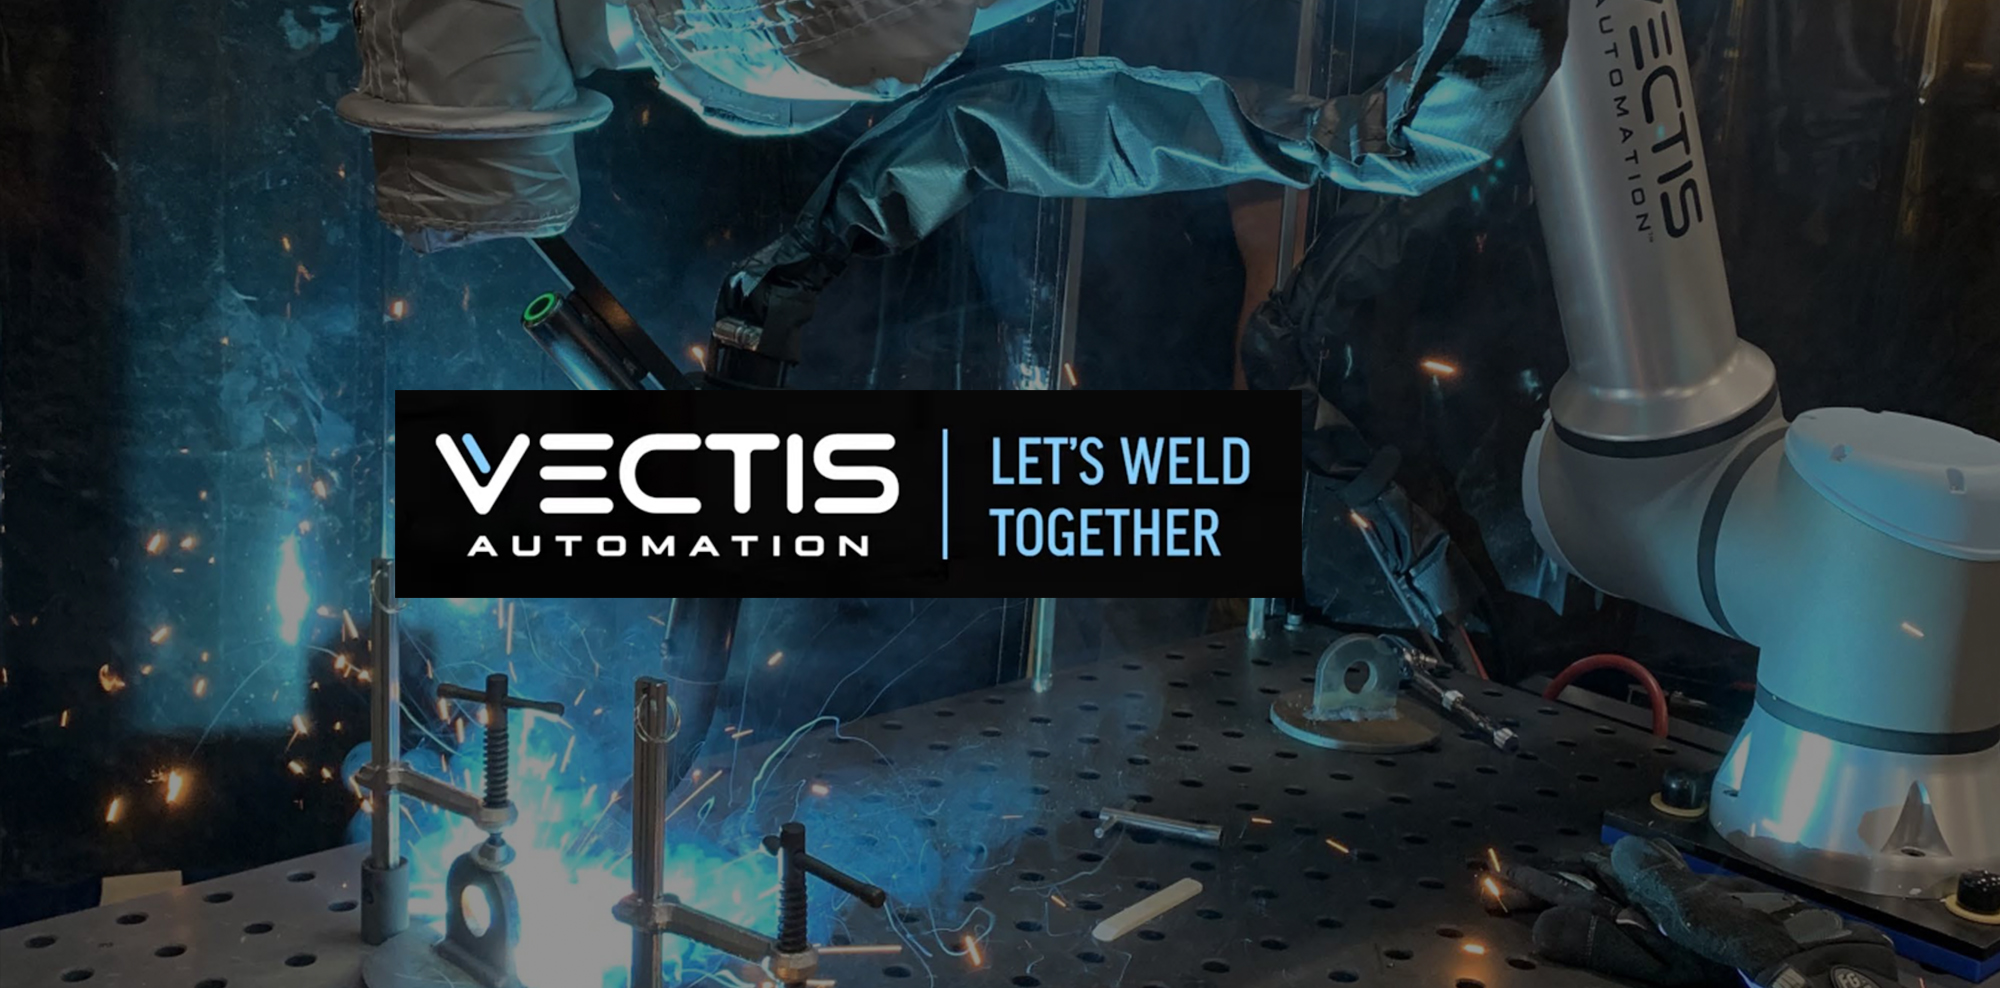 View the Vectis Cobot Welding page